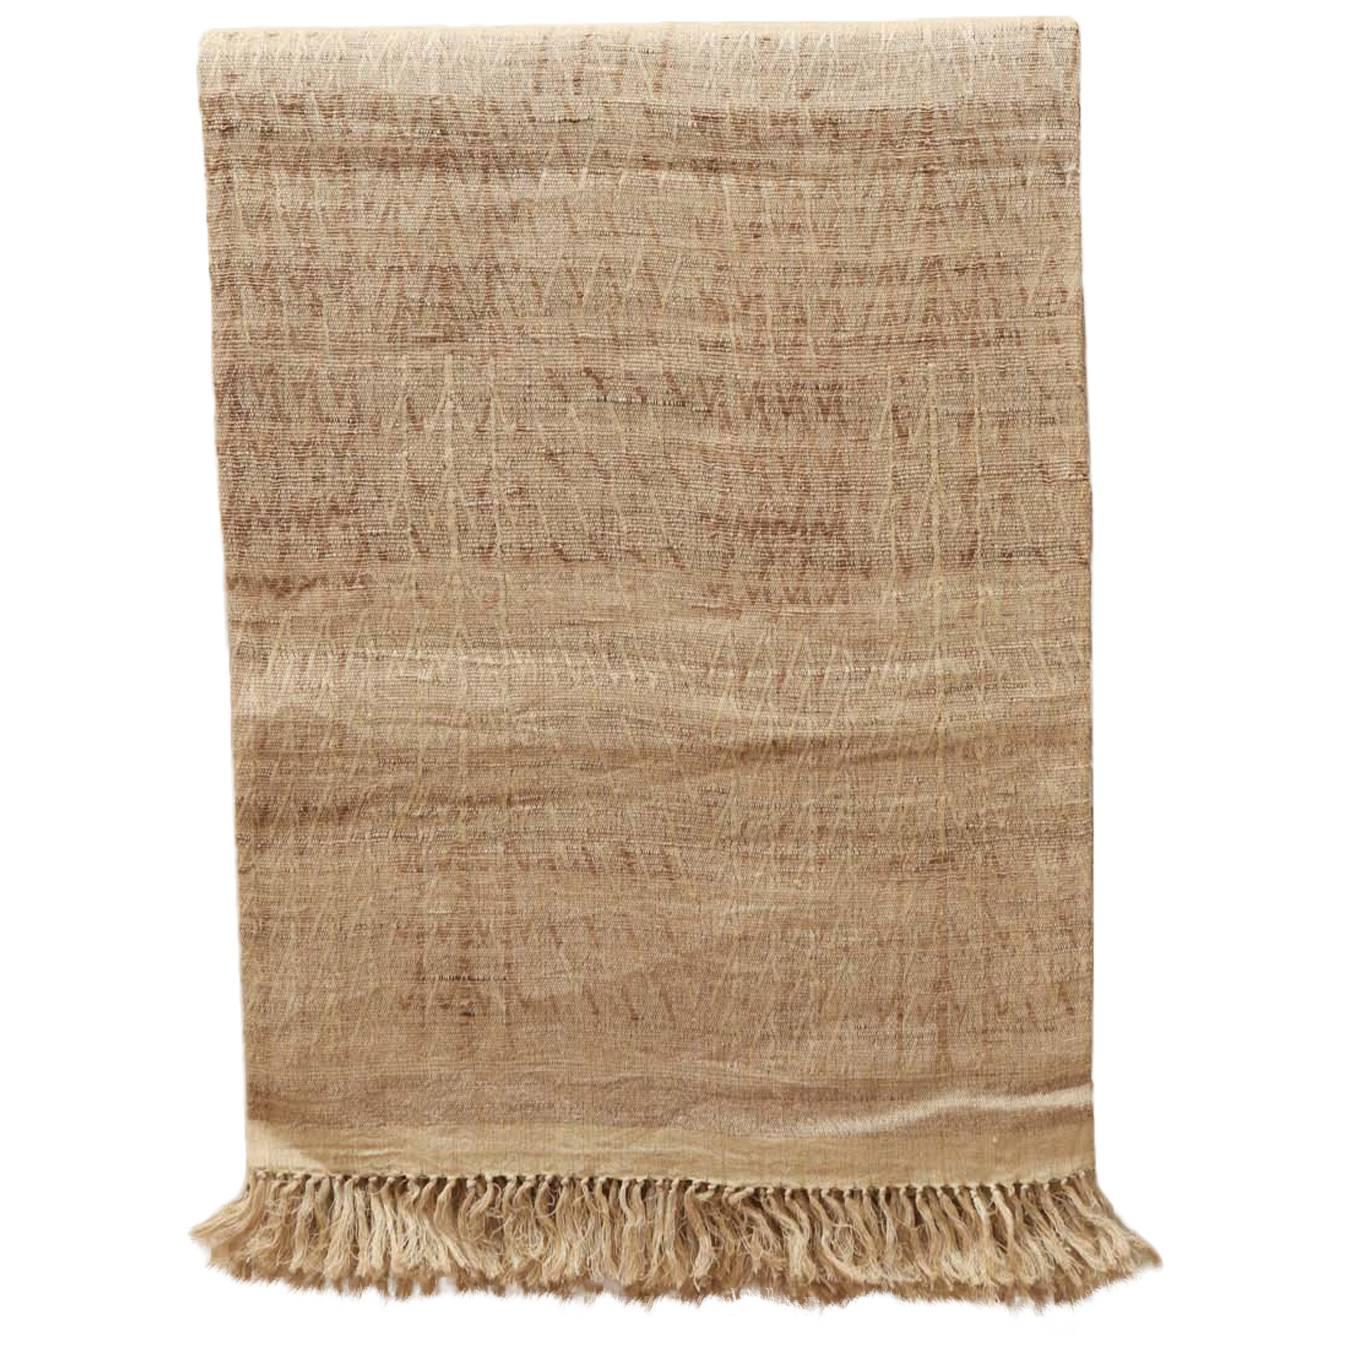 Indian HandWoven Bedcover.  Oatmeal and Light Brown.  Linen and Raw Silk. For Sale